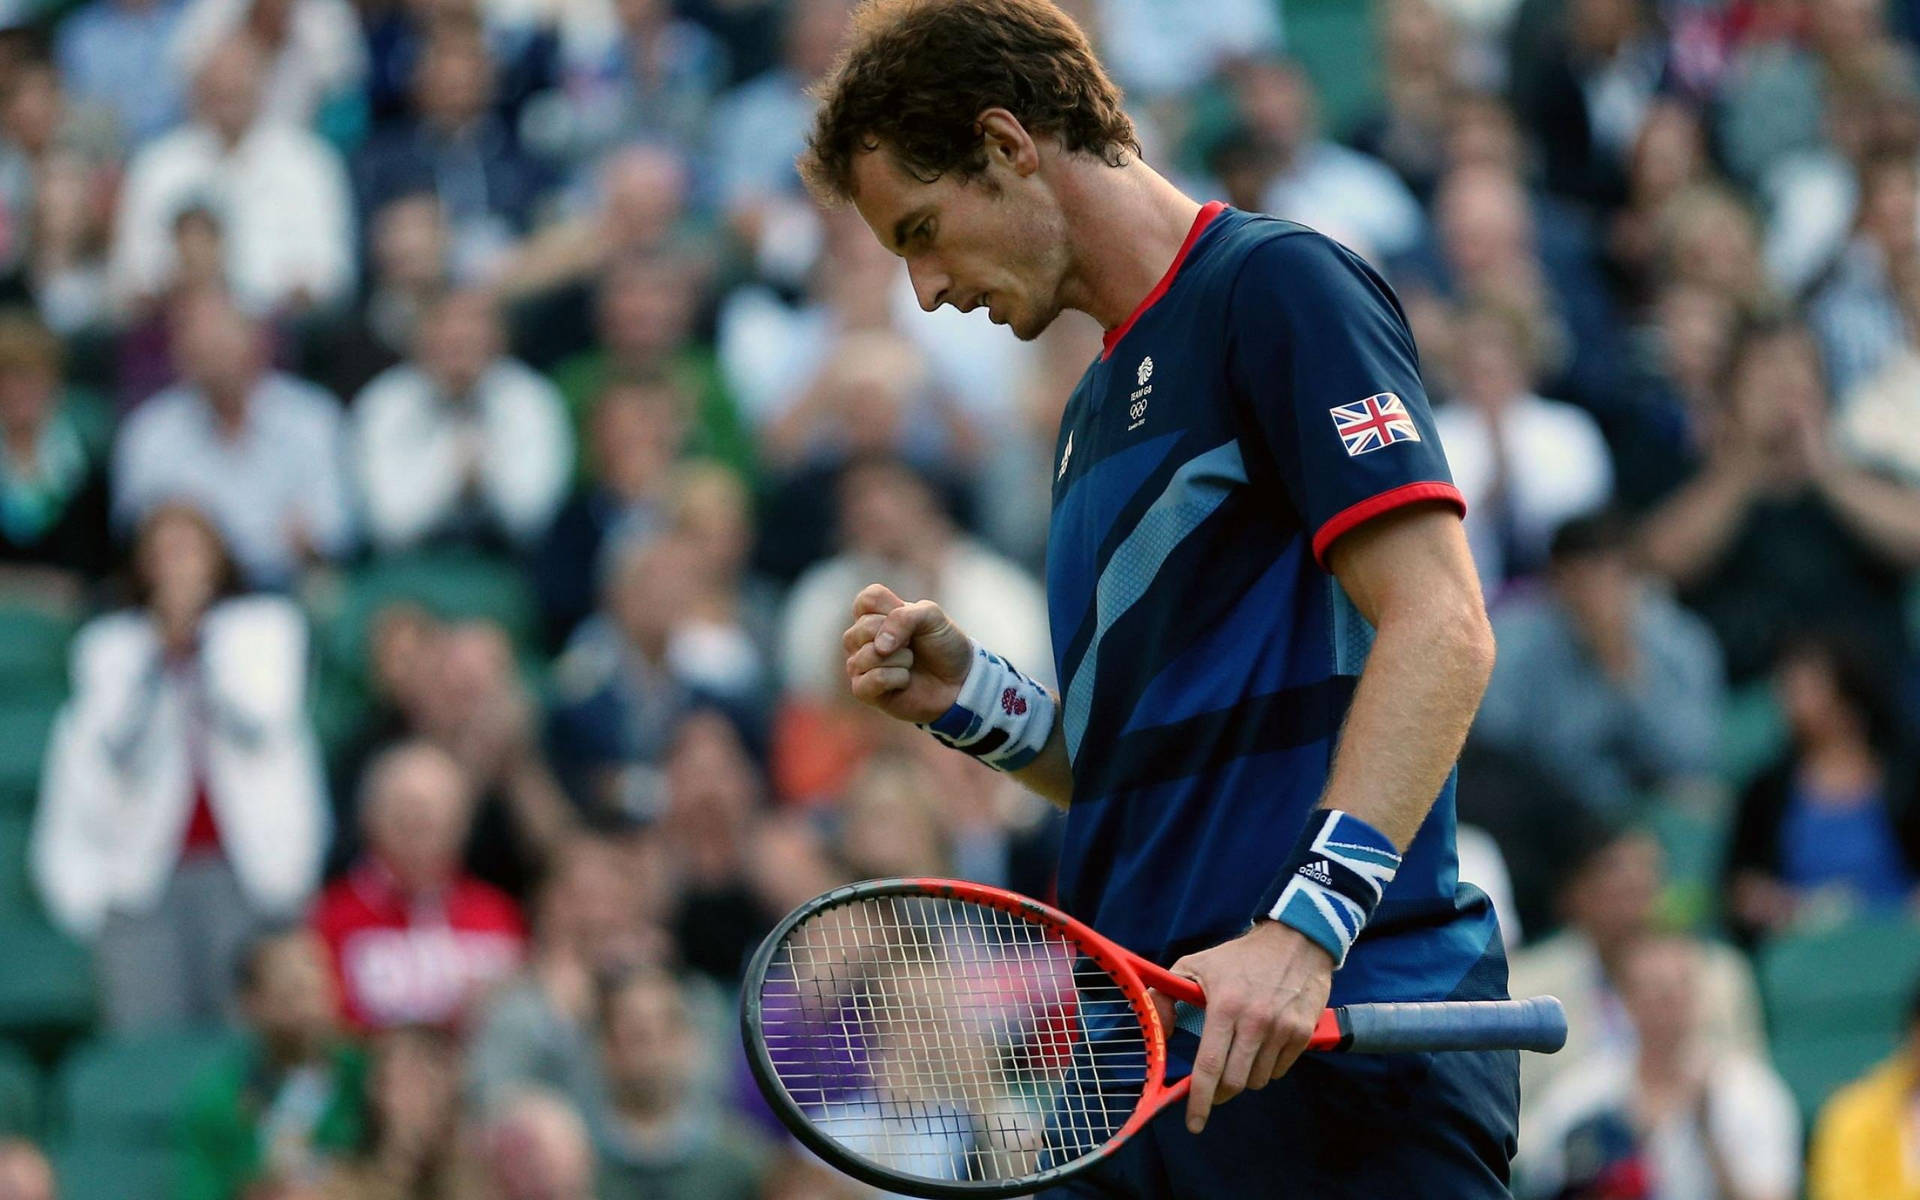 A Reflective Moment With Andy Murray